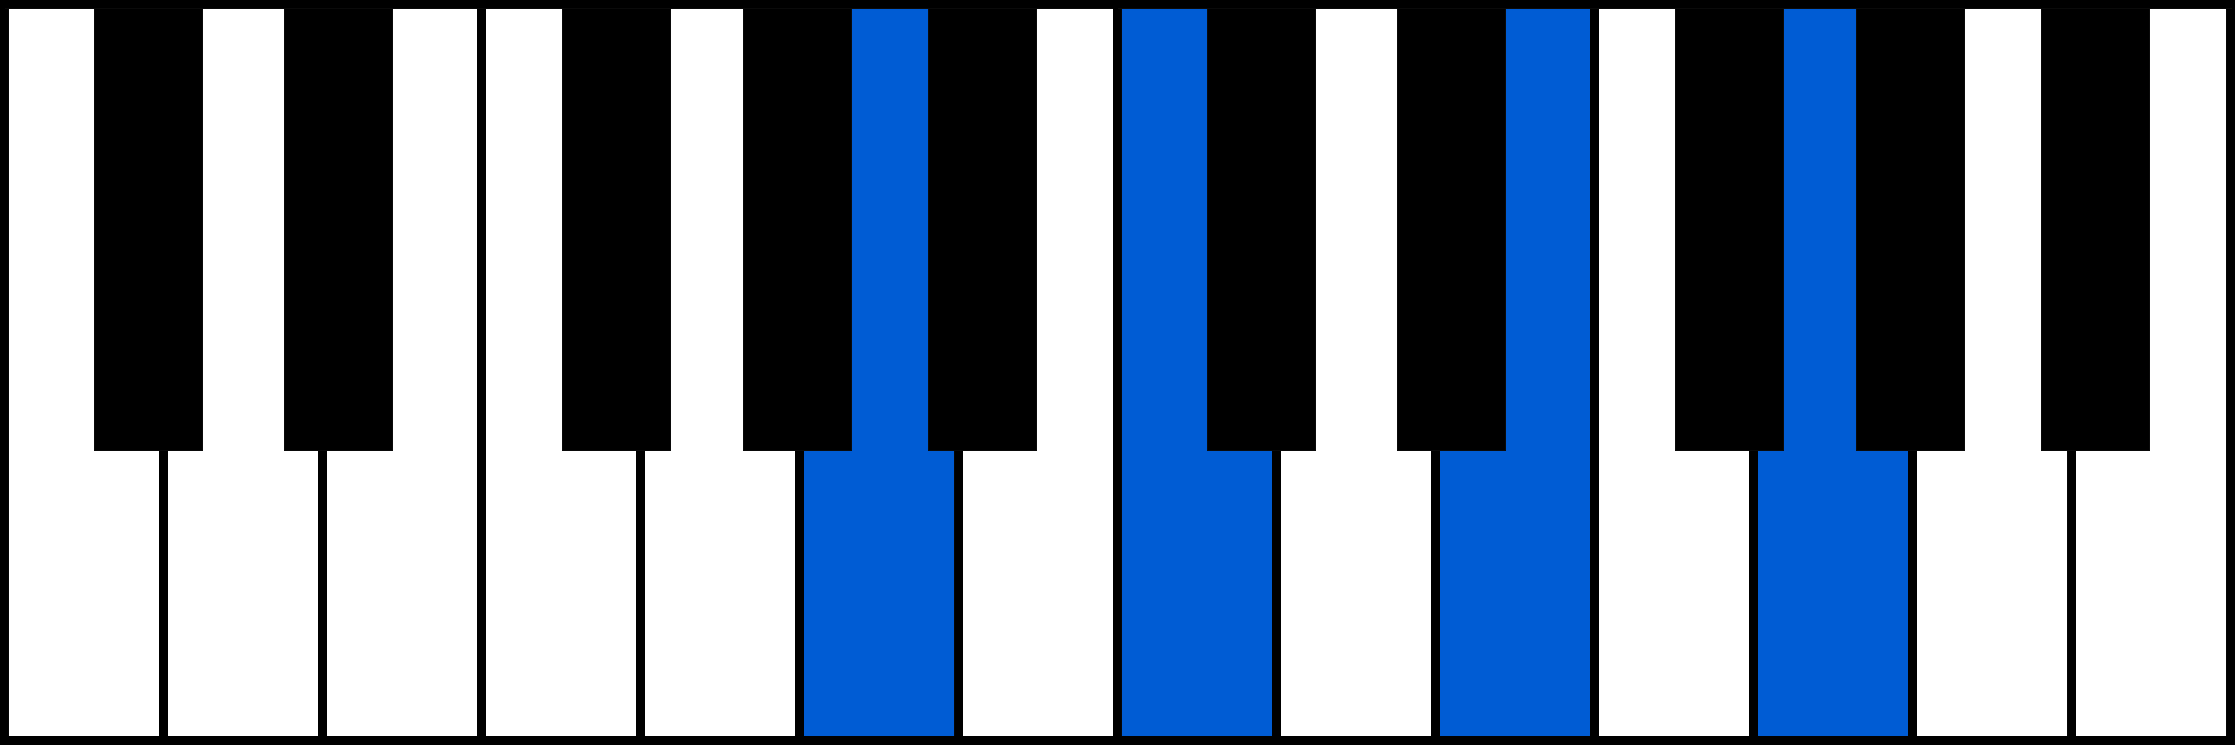 Am7 piano chord fingering